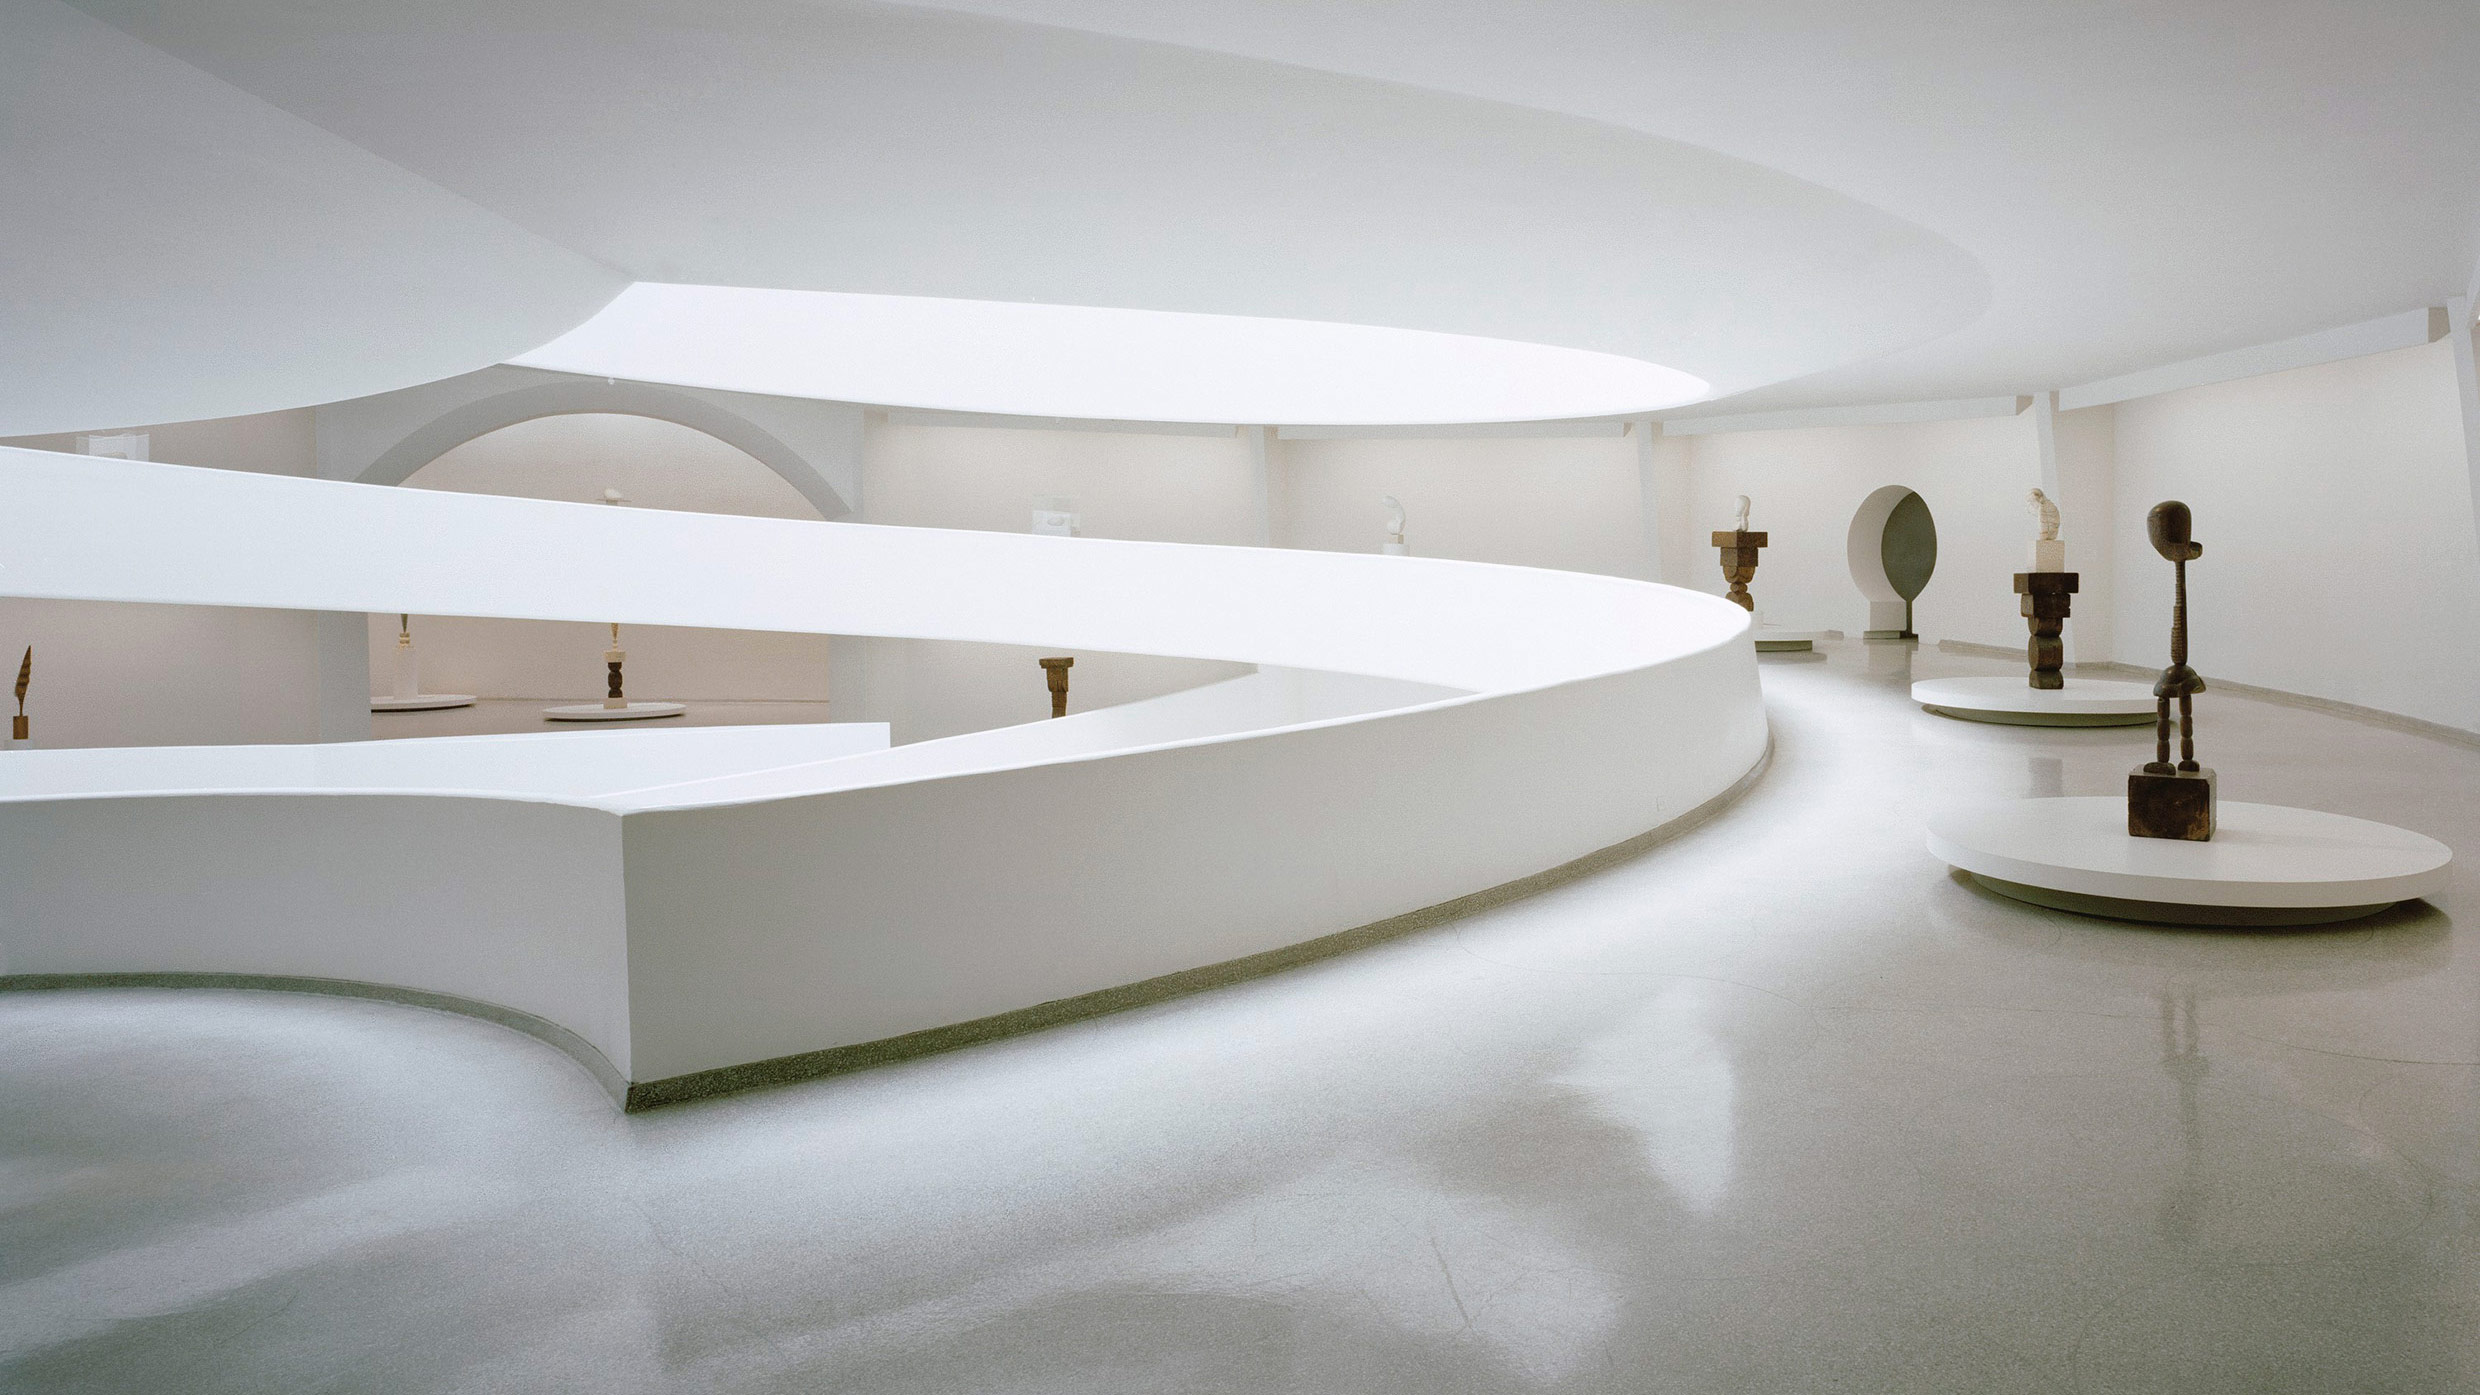 About the Collection | The Guggenheim Museums and Foundation